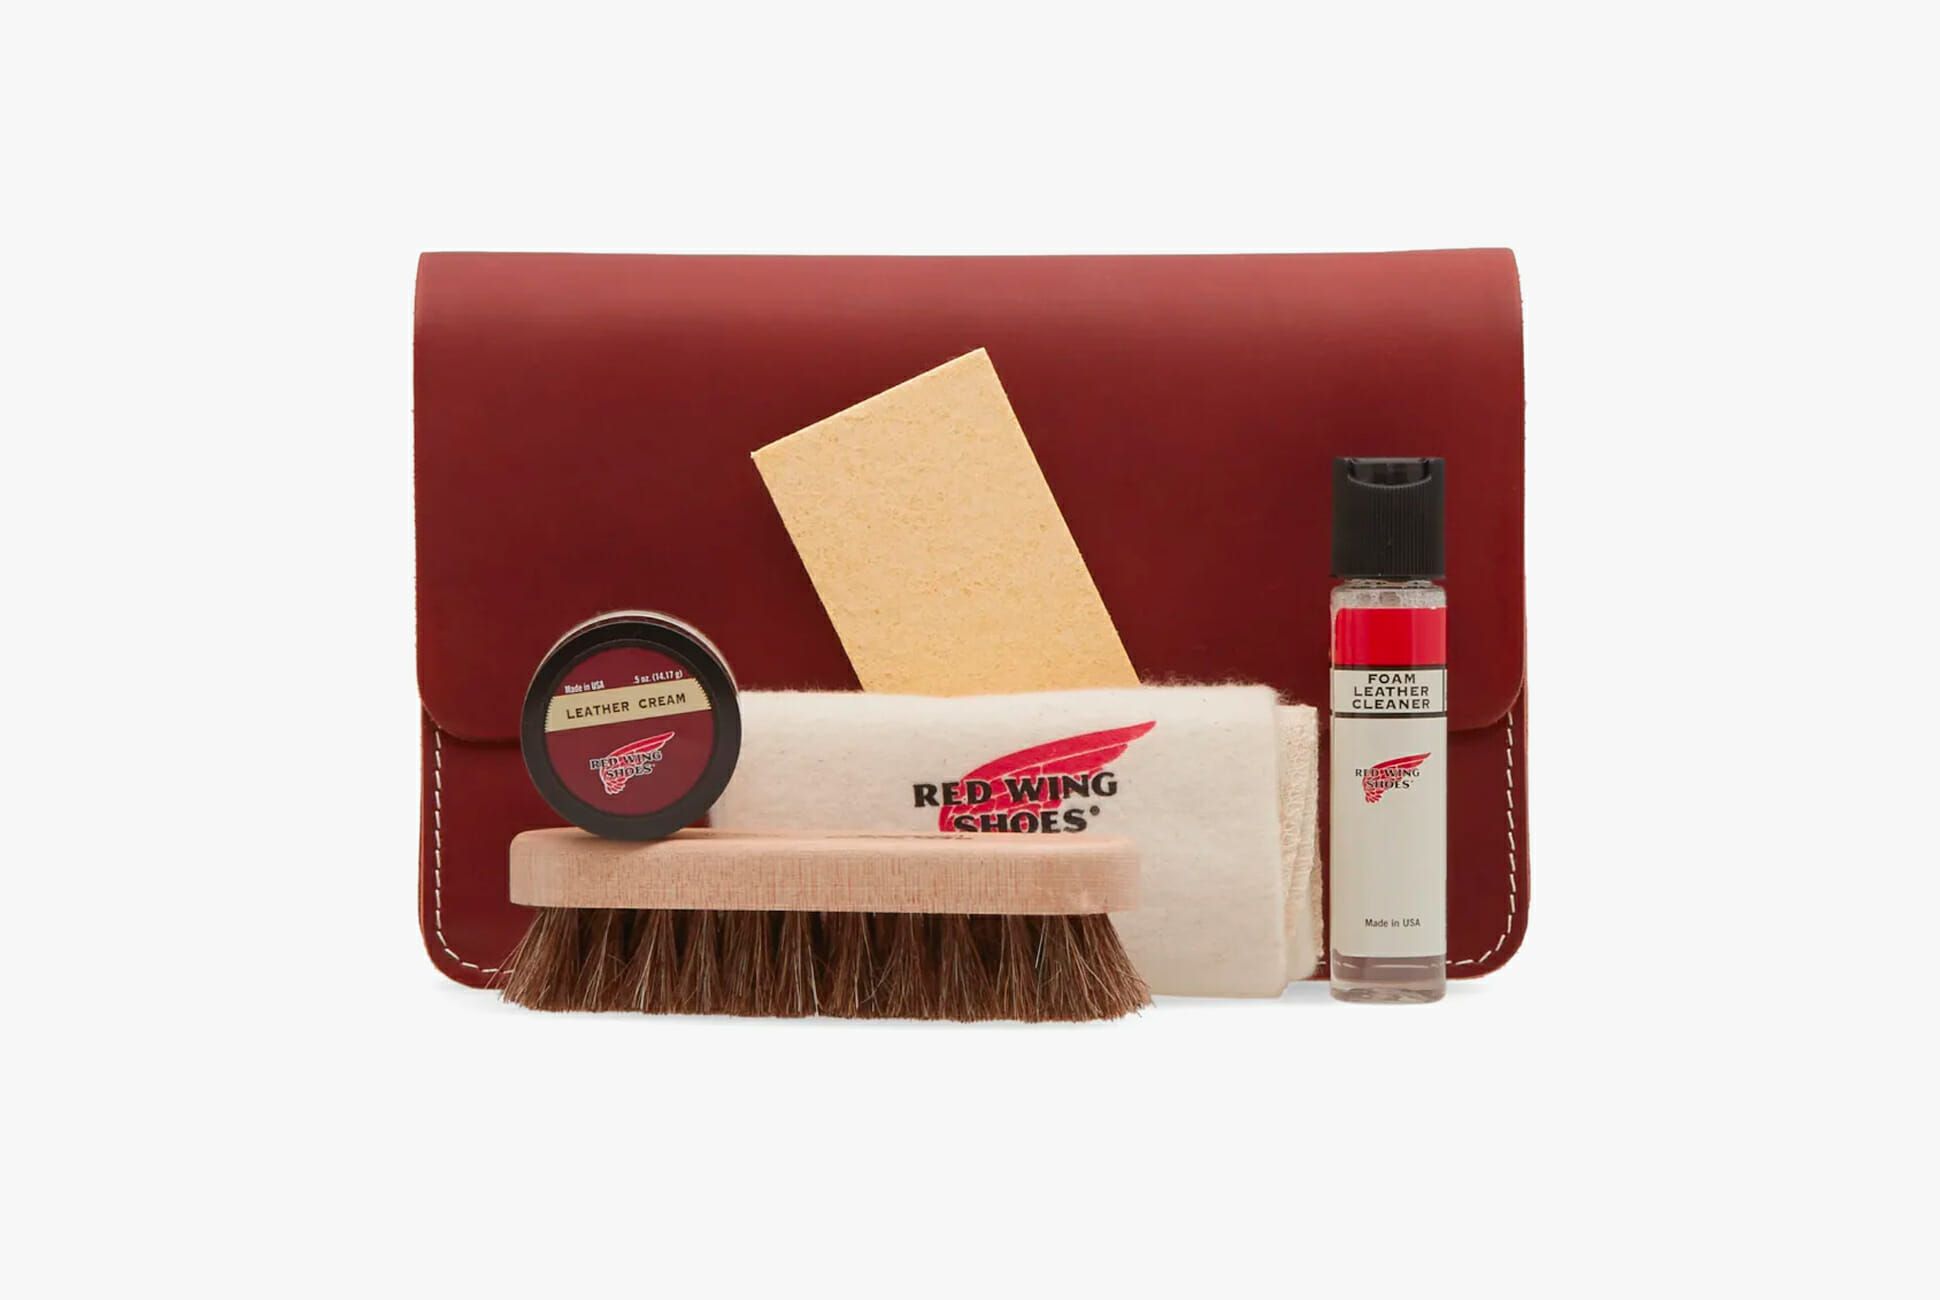 red wing care products